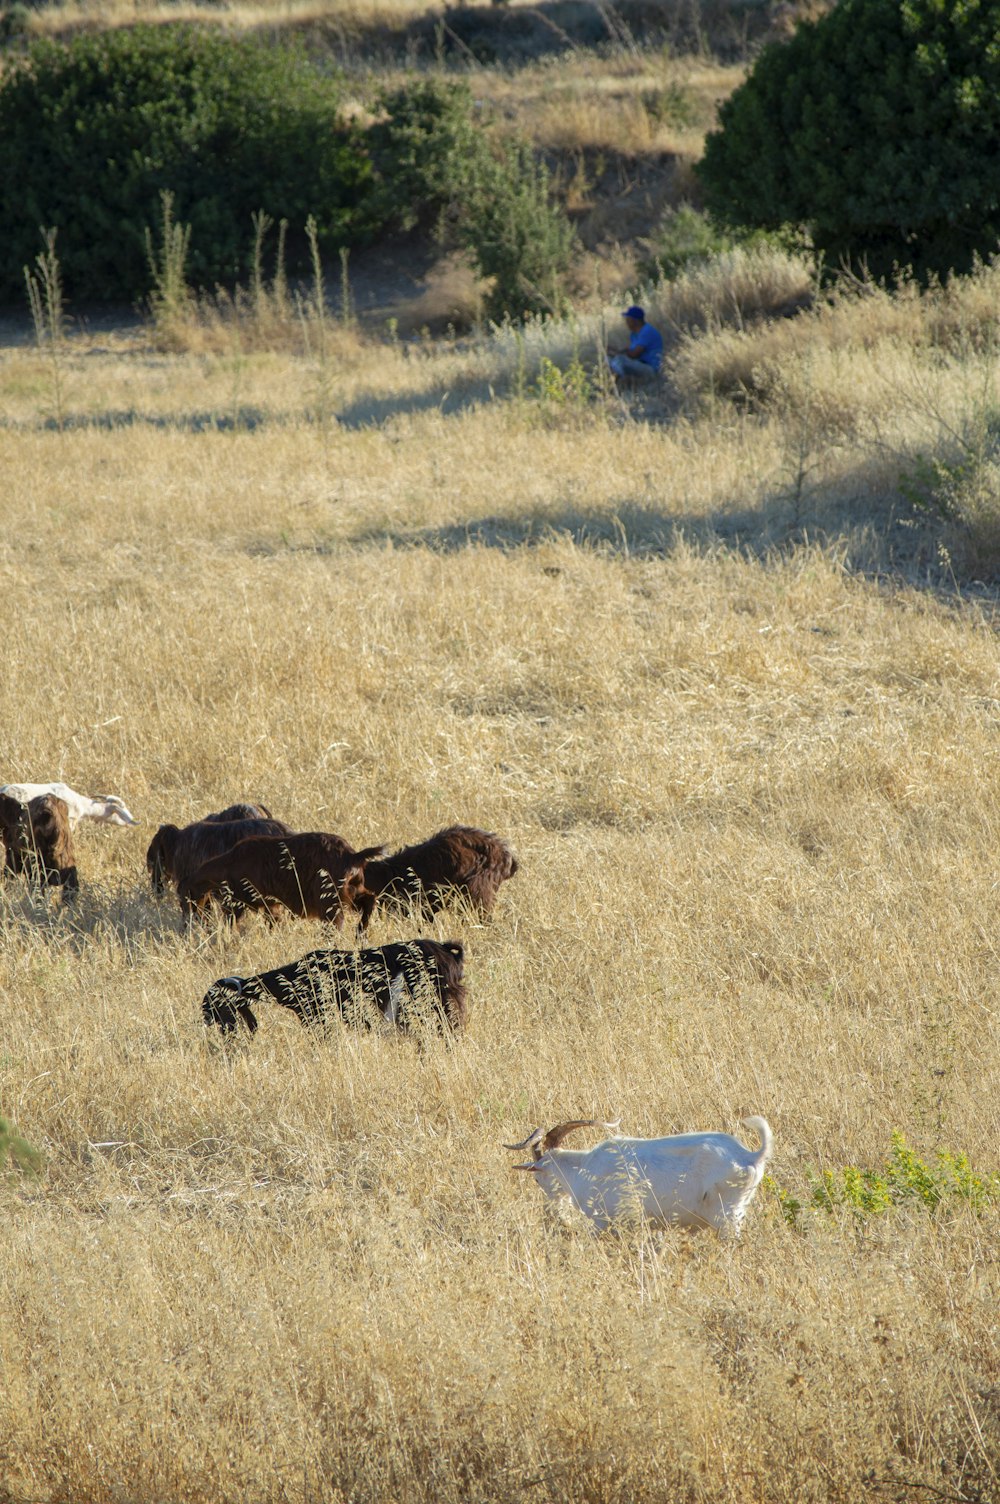 a herd of cattle grazing on a dry grass field